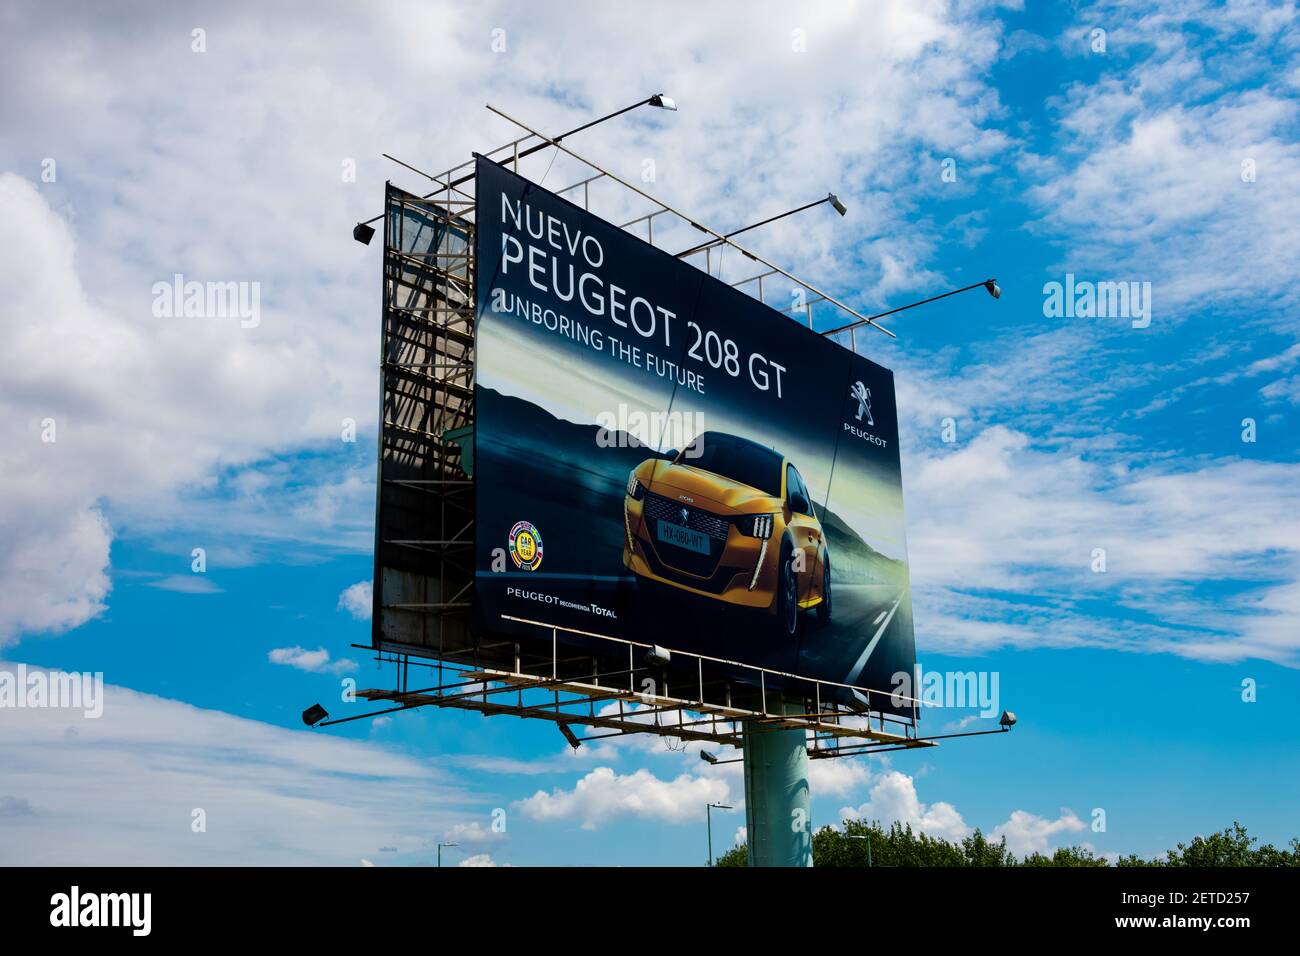 Buenos Aires, Argentina. February 14, 2021. New Peugeot 208 GT car sign in Leopoldo Lugones Avenue Stock Photo